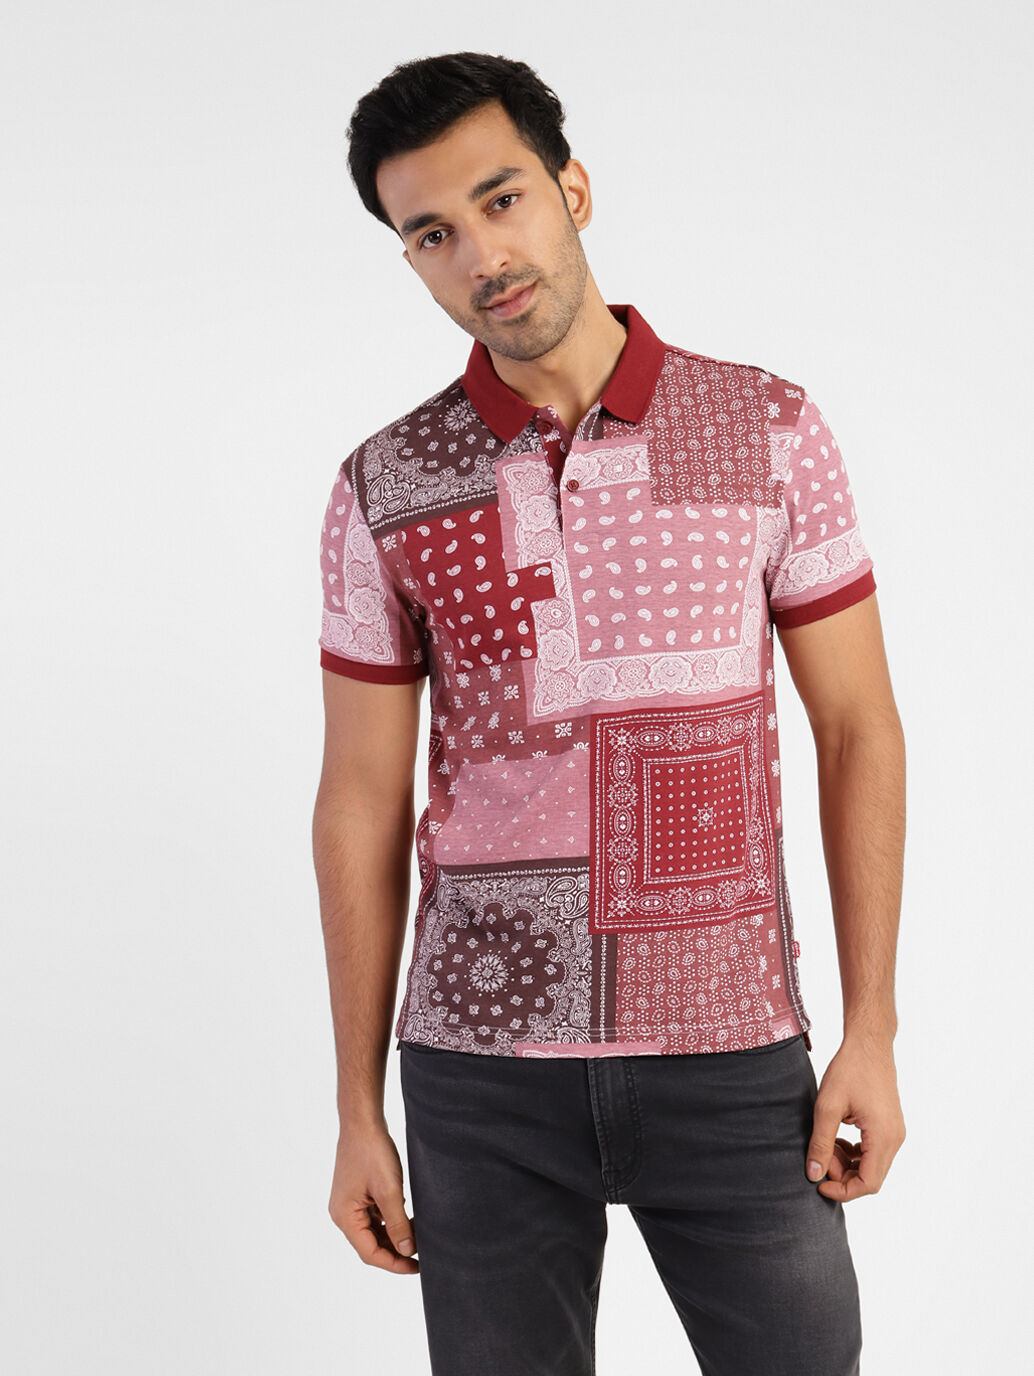 LEVI'S® MEN'S PRINTED RED POLO T-SHIRT 17474-0294